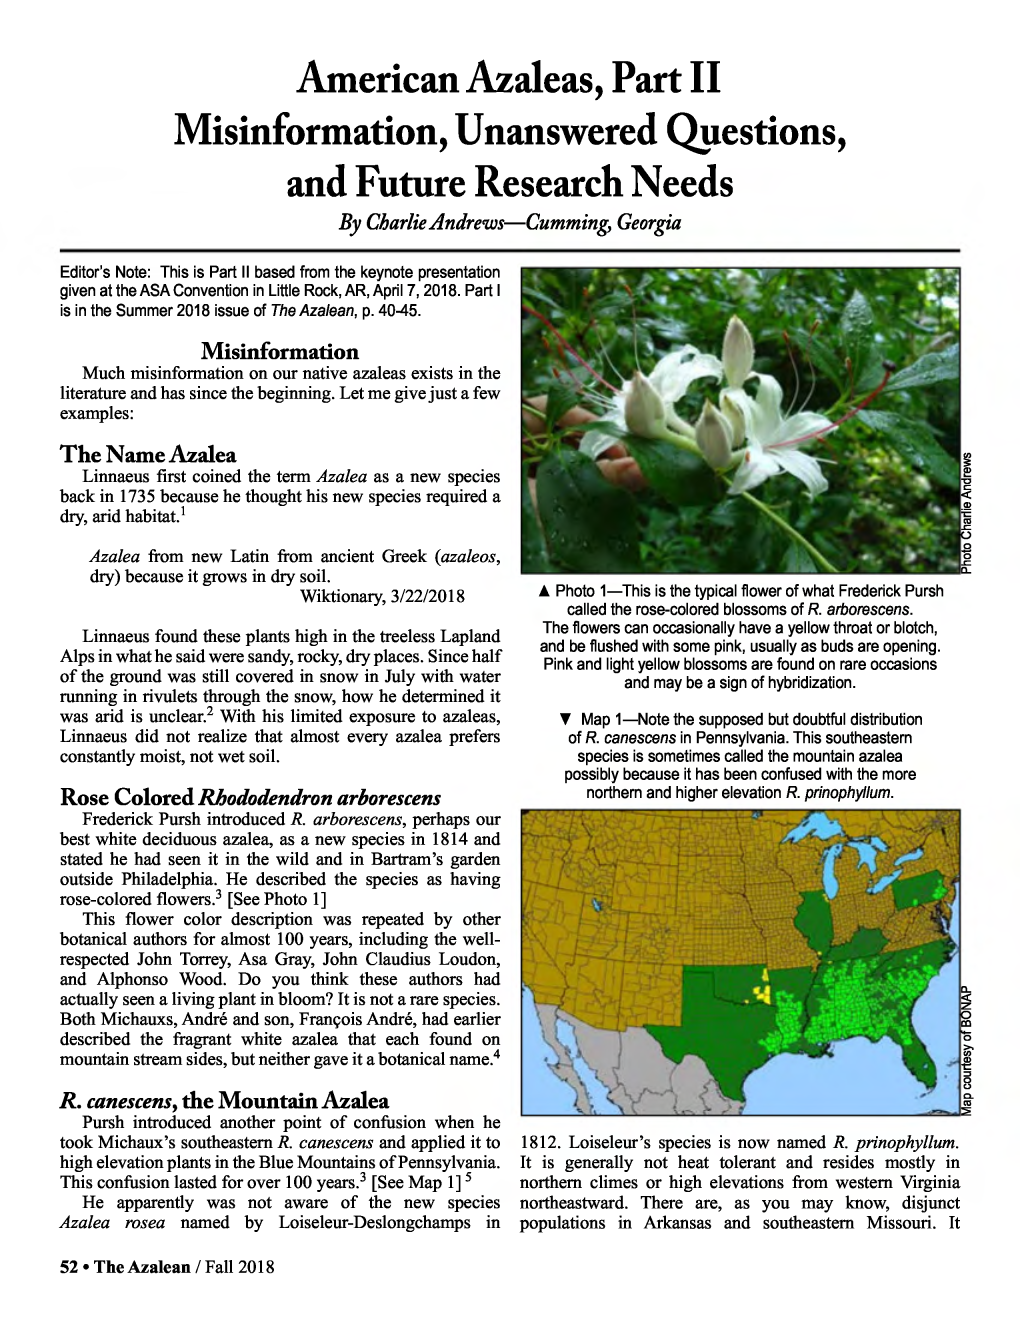 American Azaleas, Part II Misinformation, Unanswered Questions, and Future Research Needs by Charlie Andrews—Cumming, Georgia